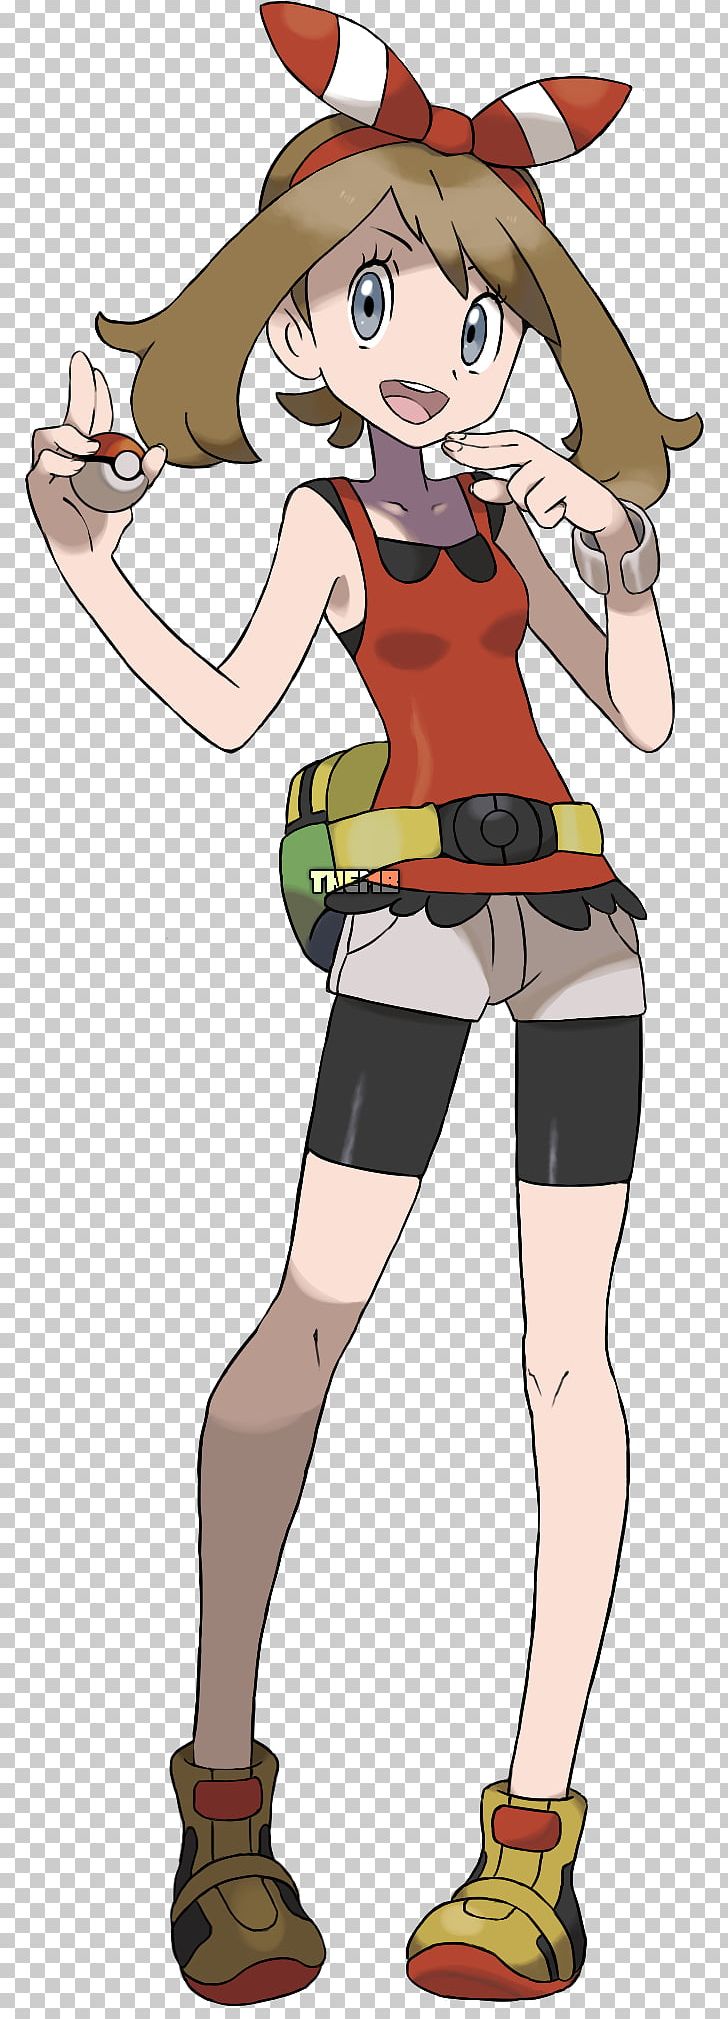 Pokémon Omega Ruby And Alpha Sapphire Pokémon Ruby And Sapphire May Brendan Pokémon Adventures PNG, Clipart, Arm, Cartoon, Fictional Character, Hand, Human Free PNG Download